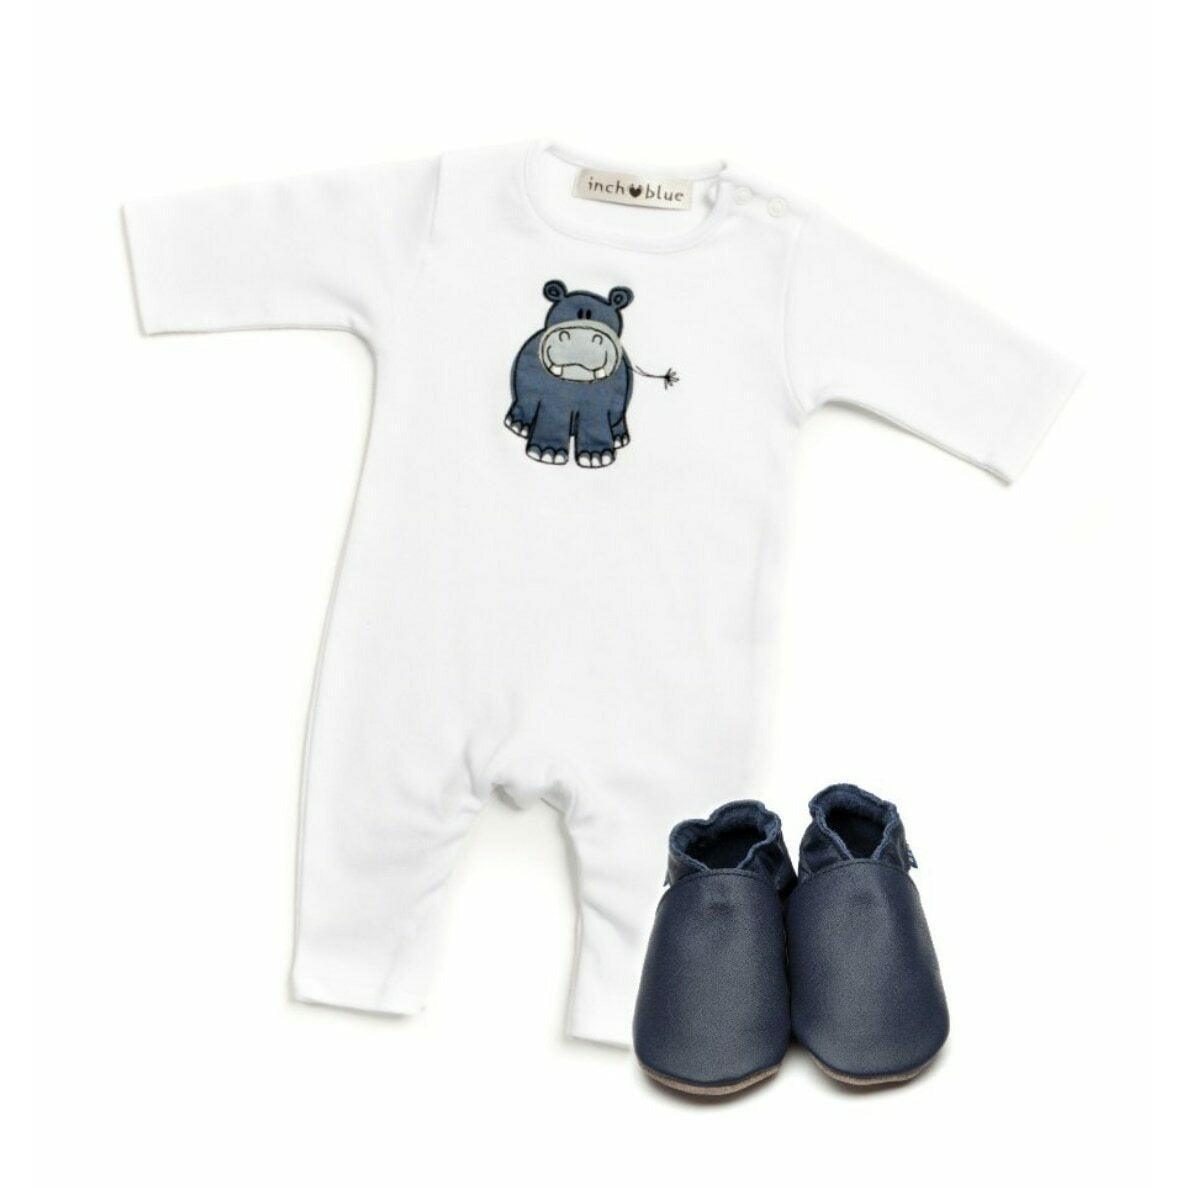 Hippo Gift Set - The Baby Cot Shop, Chelsea